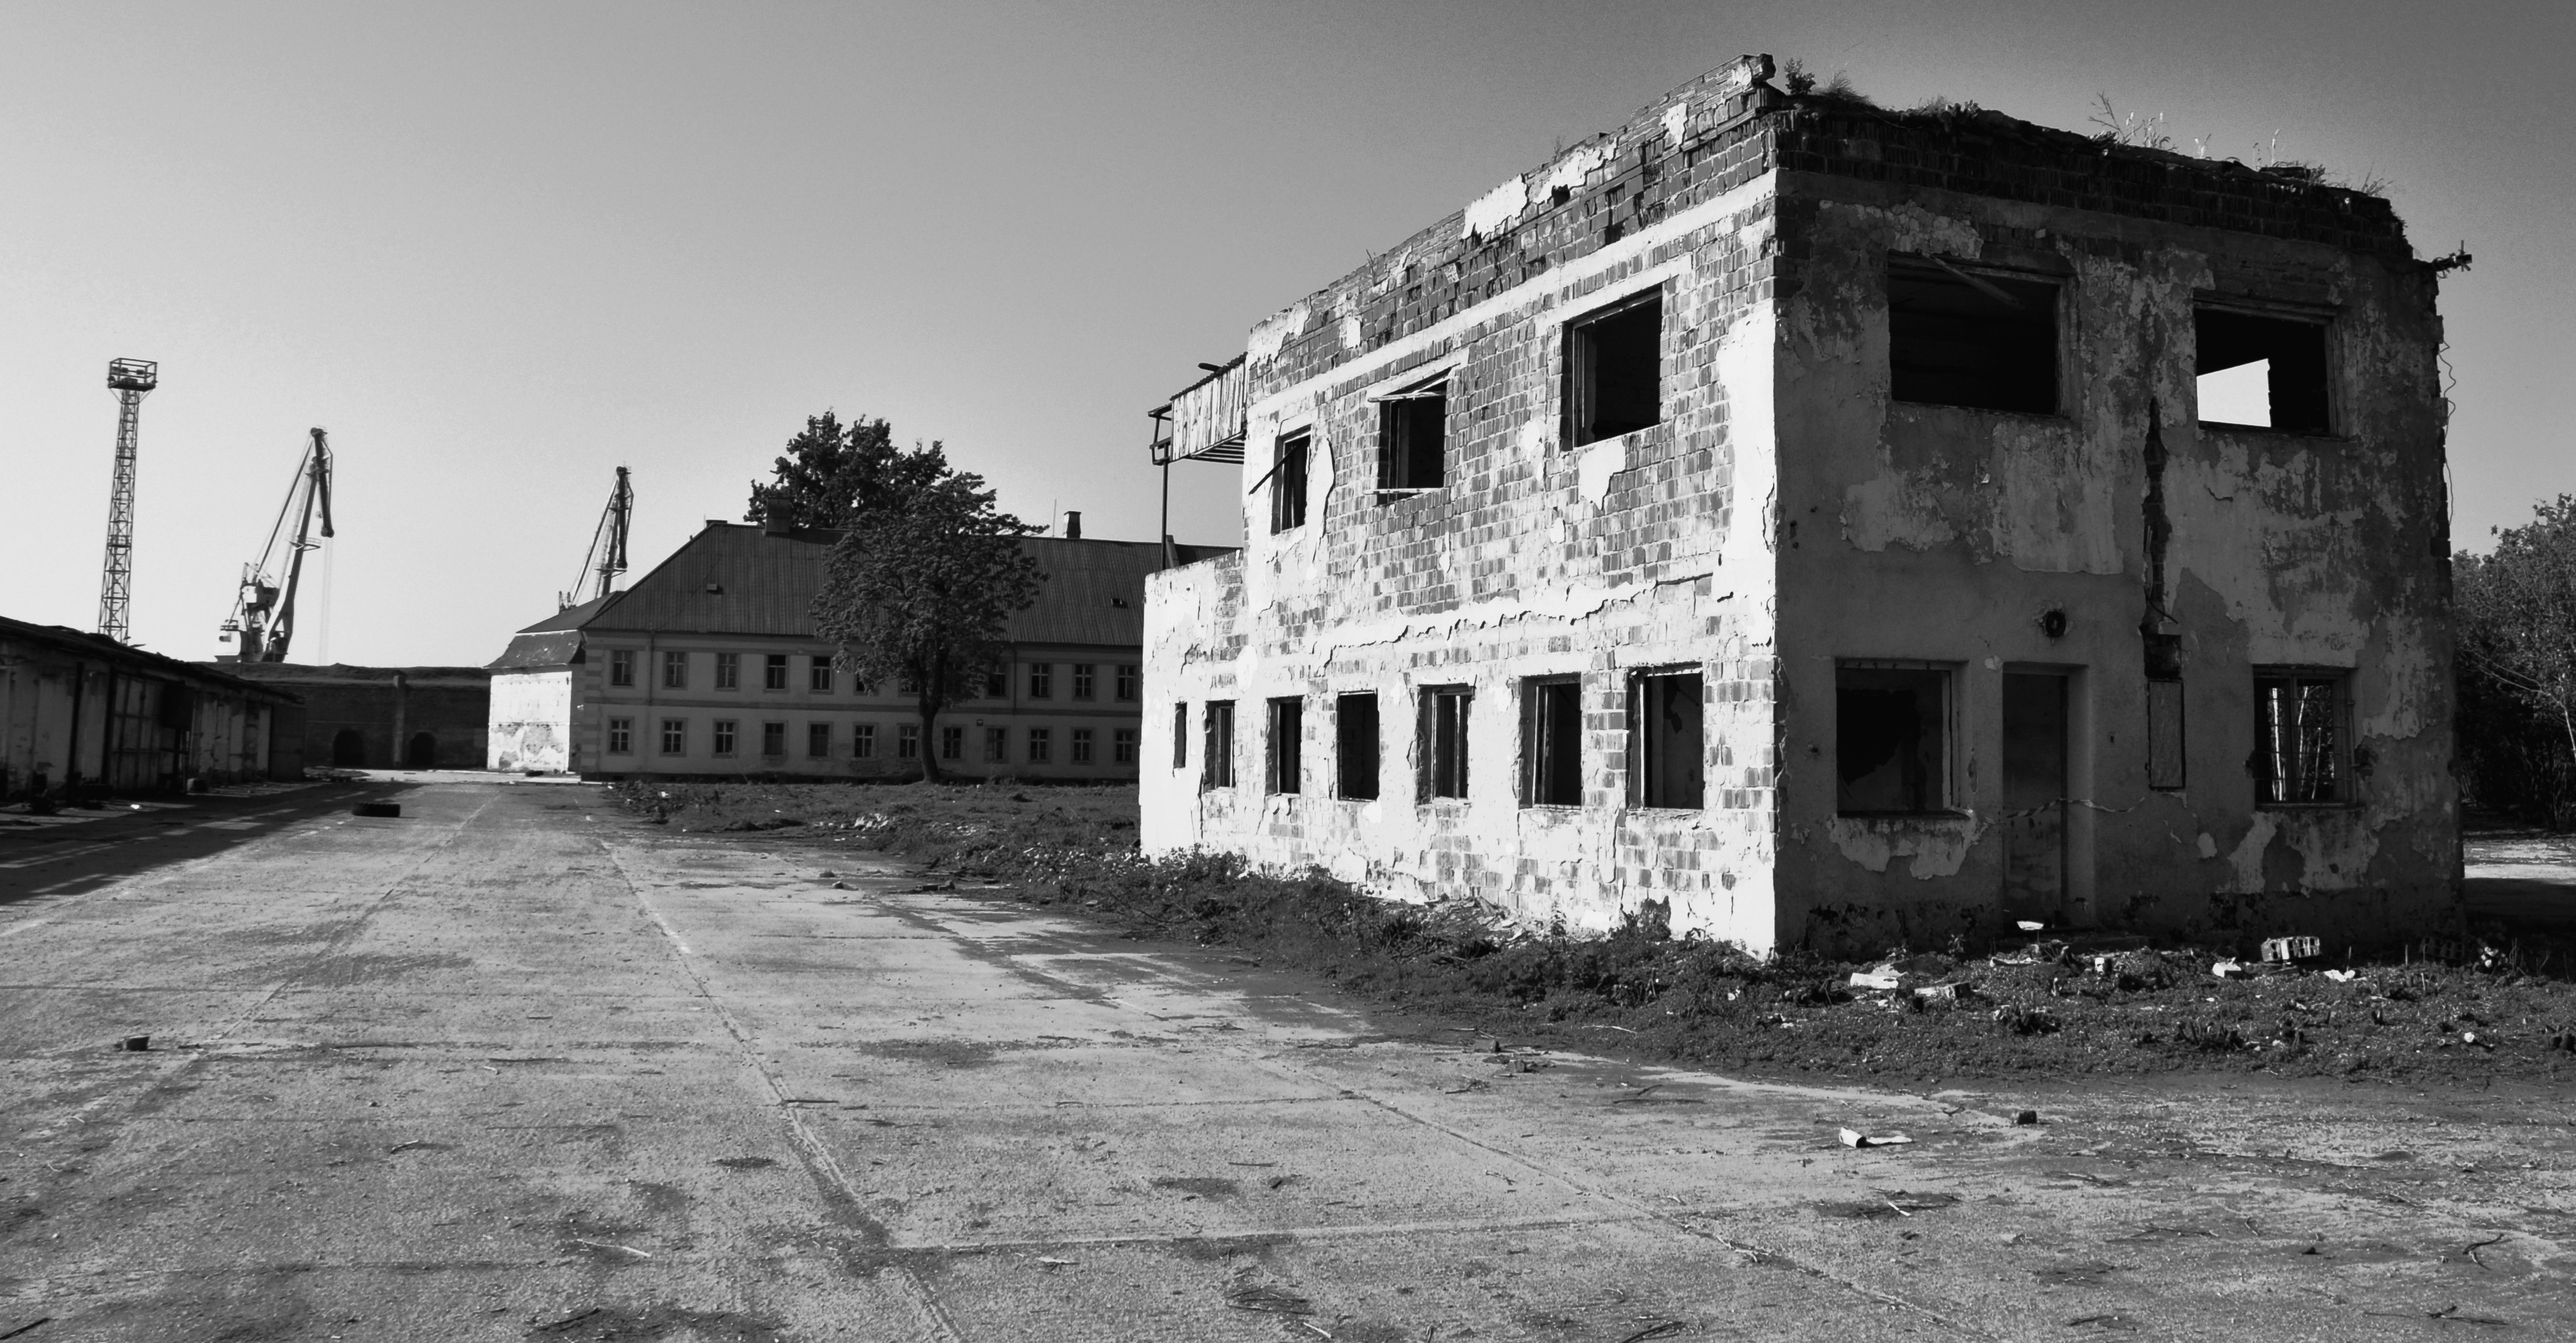 Architecture Old Building Ruin Abandoned Slovakia History Town Square Bricks Trees Cranes Machine Mo 3866x2015